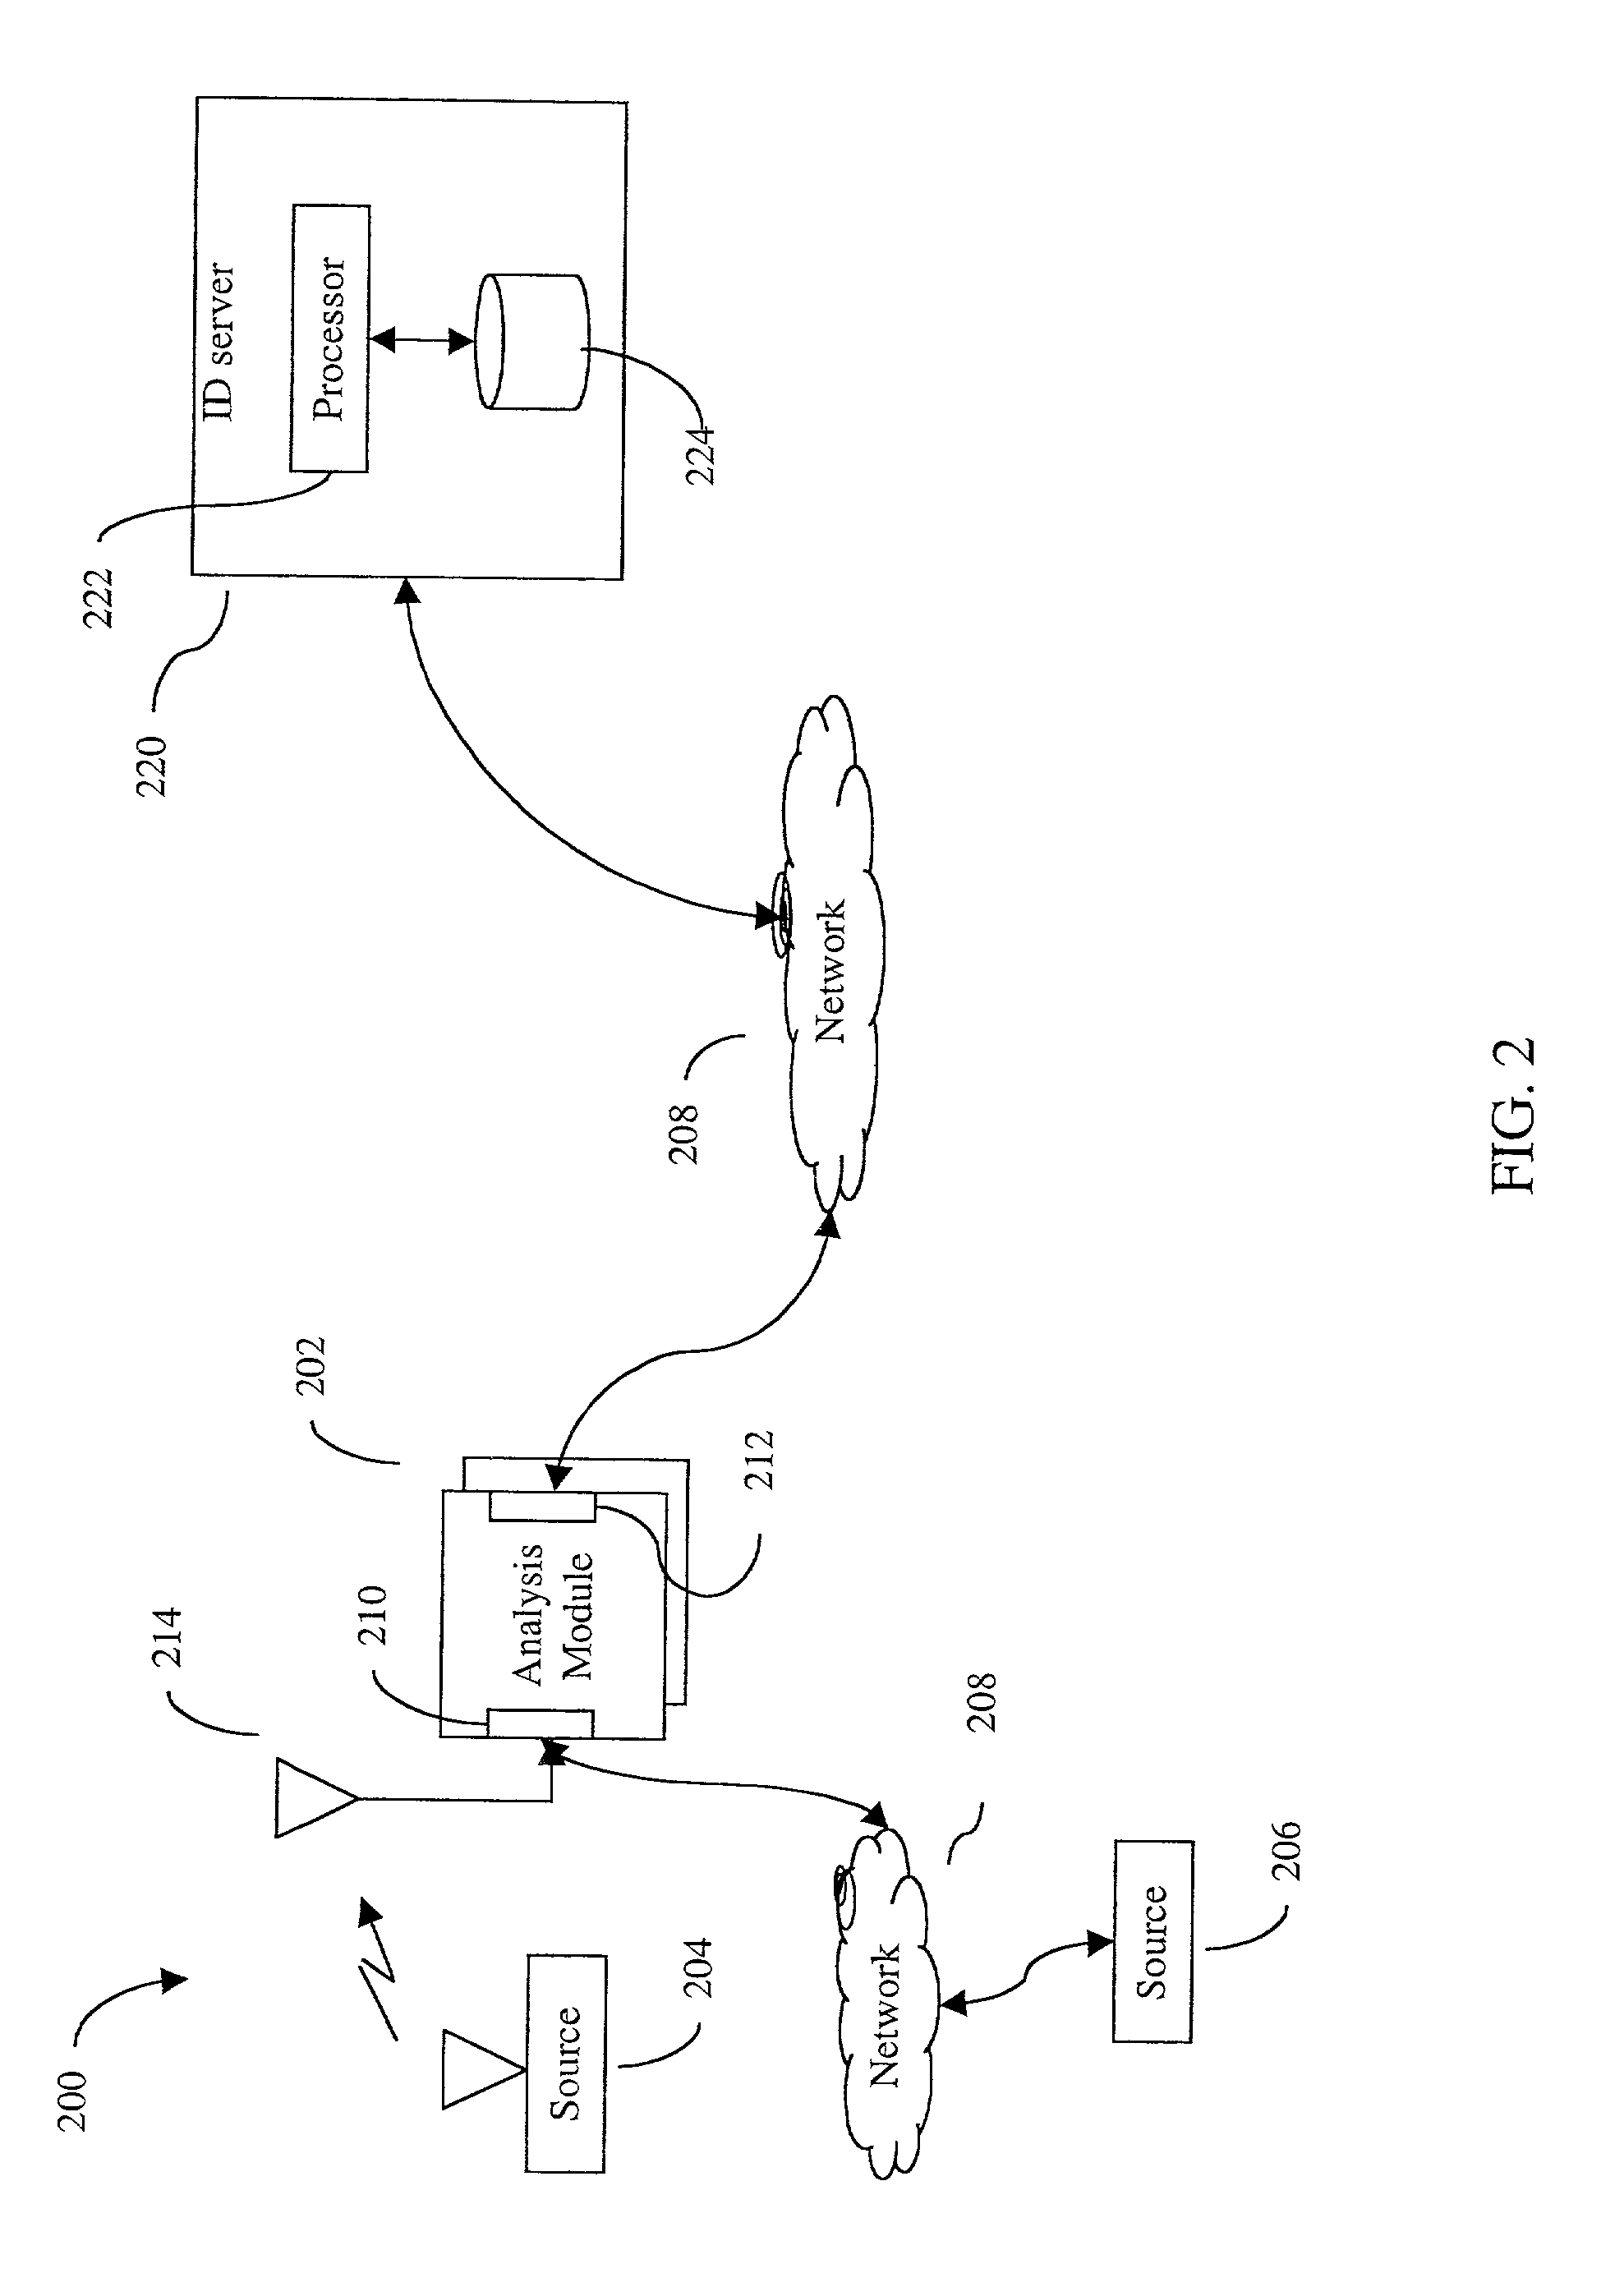 Method and apparatus for identifying new media content